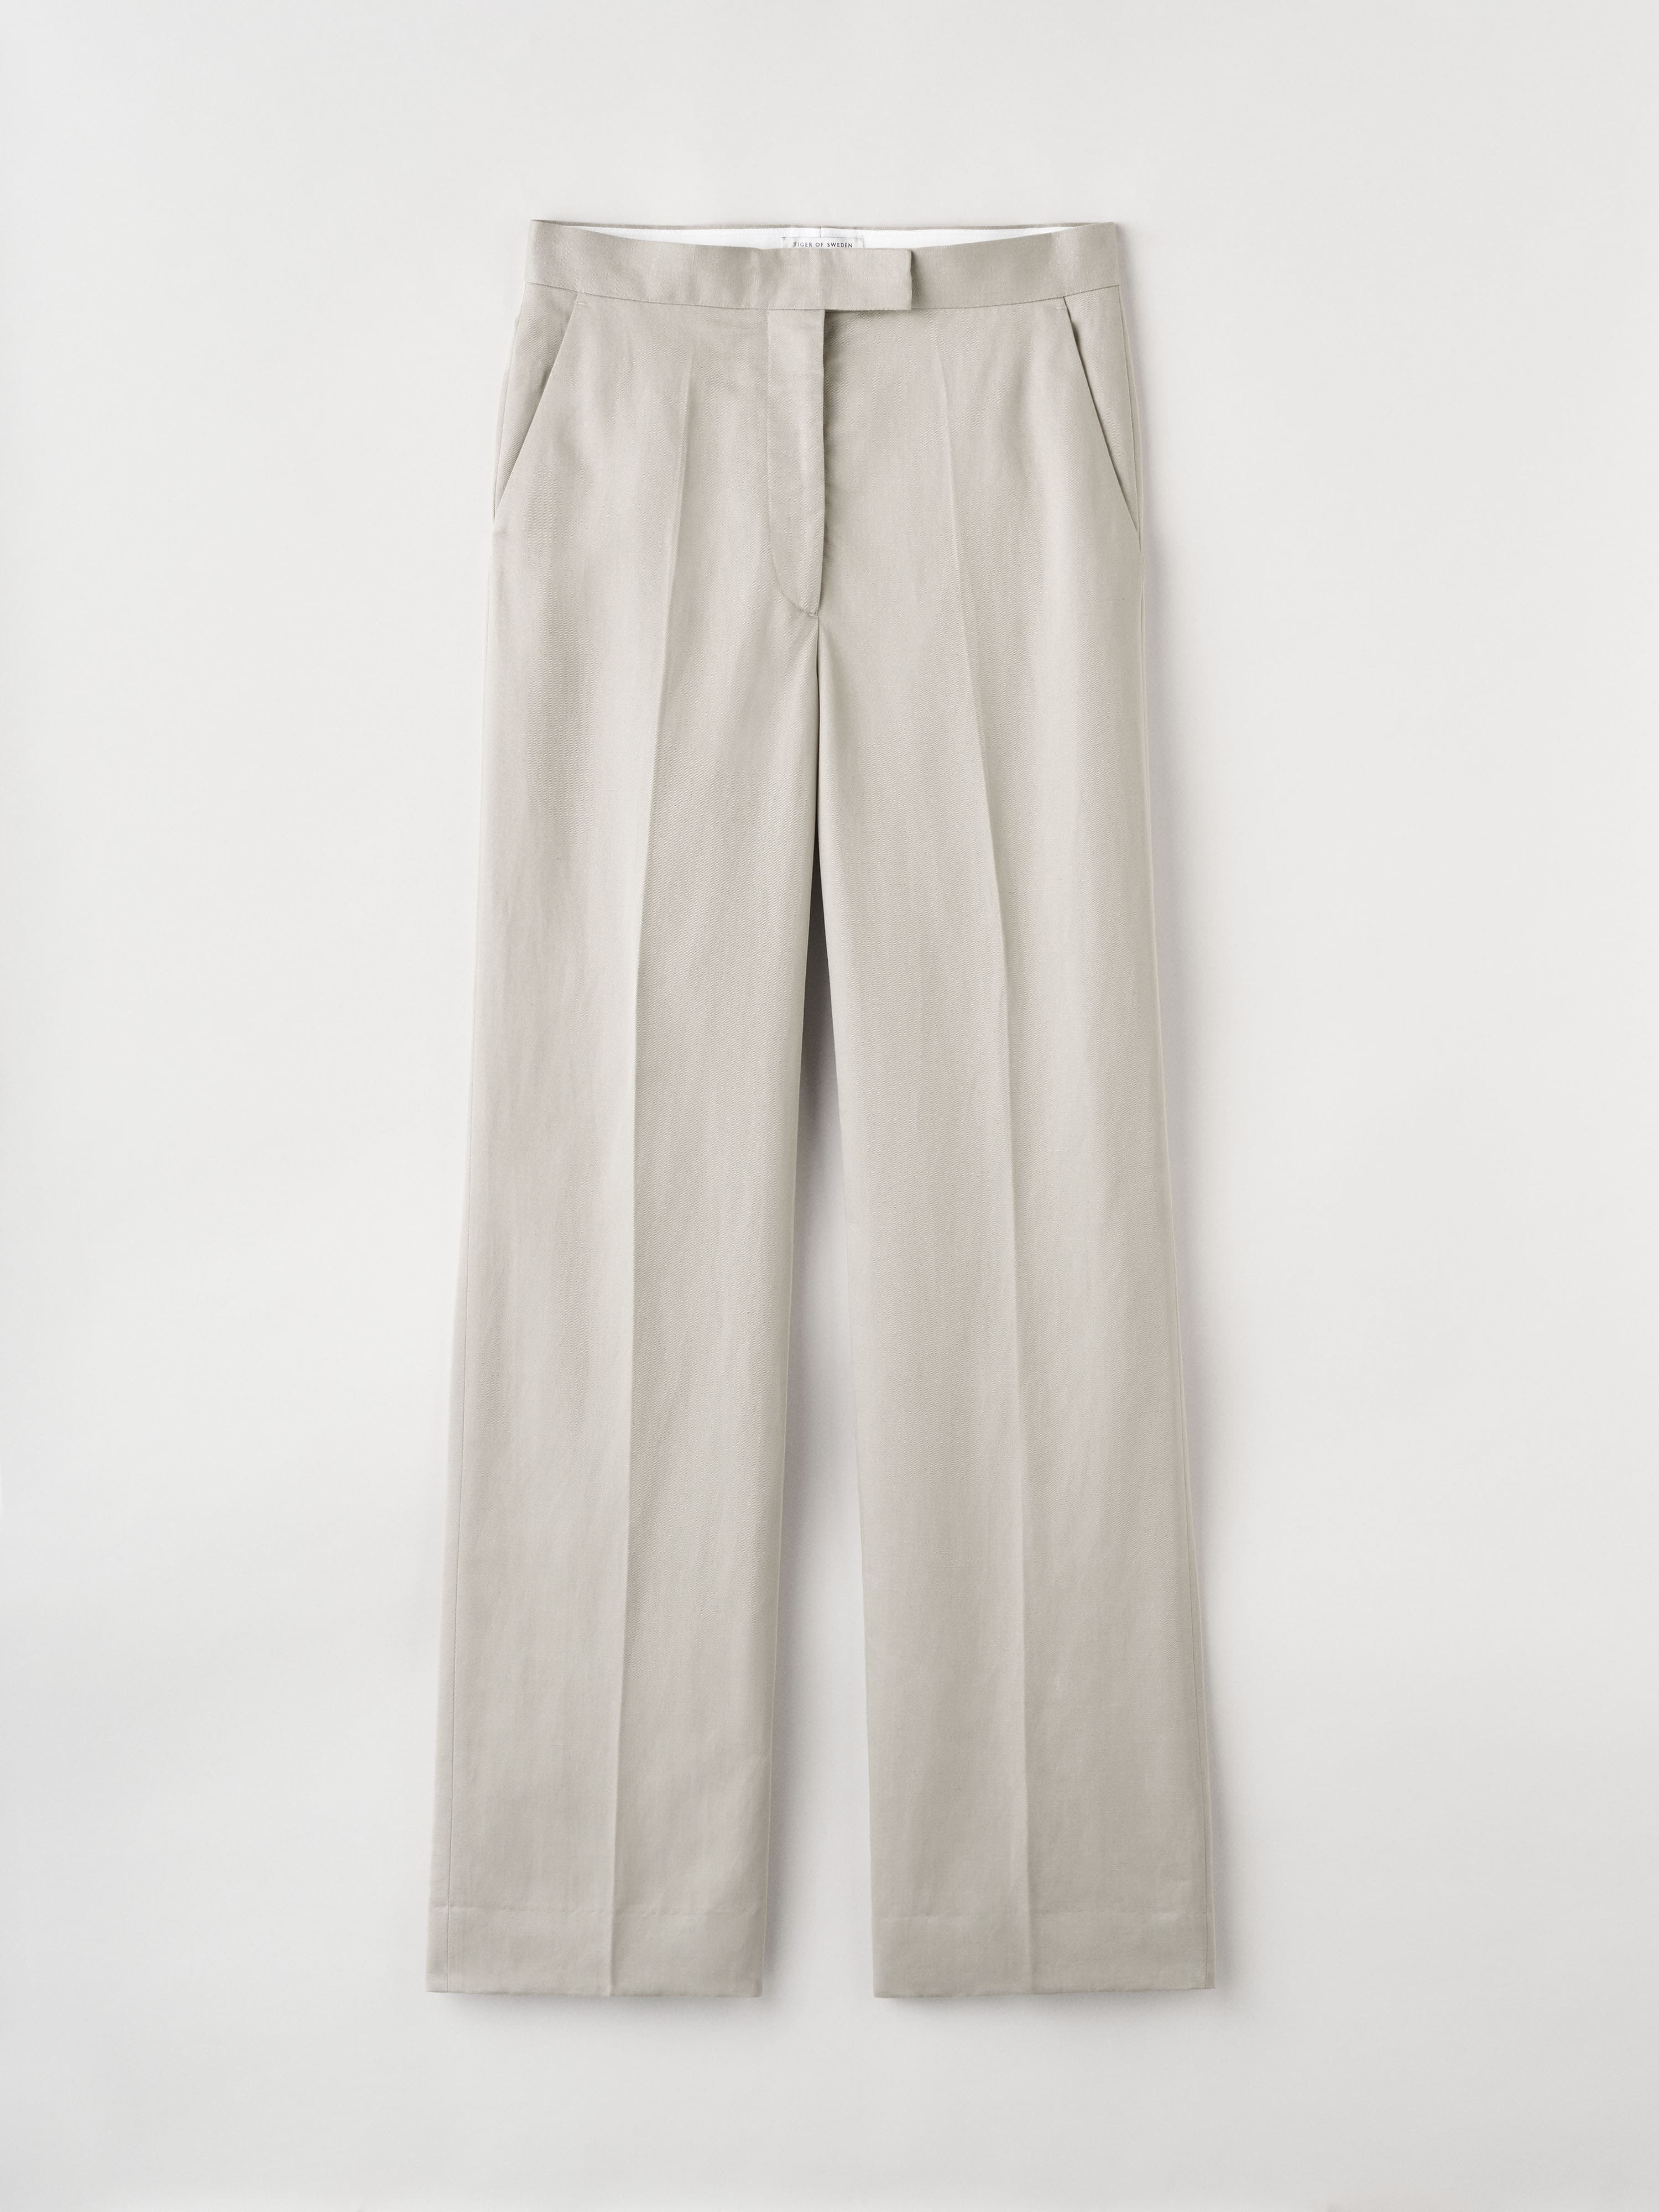 Tiger of Sweden Fragria Trousers in Light Taupe S70030015 1Y1 FROM EIGHTYWINGOLD - OFFICIAL BRAND PARTNER